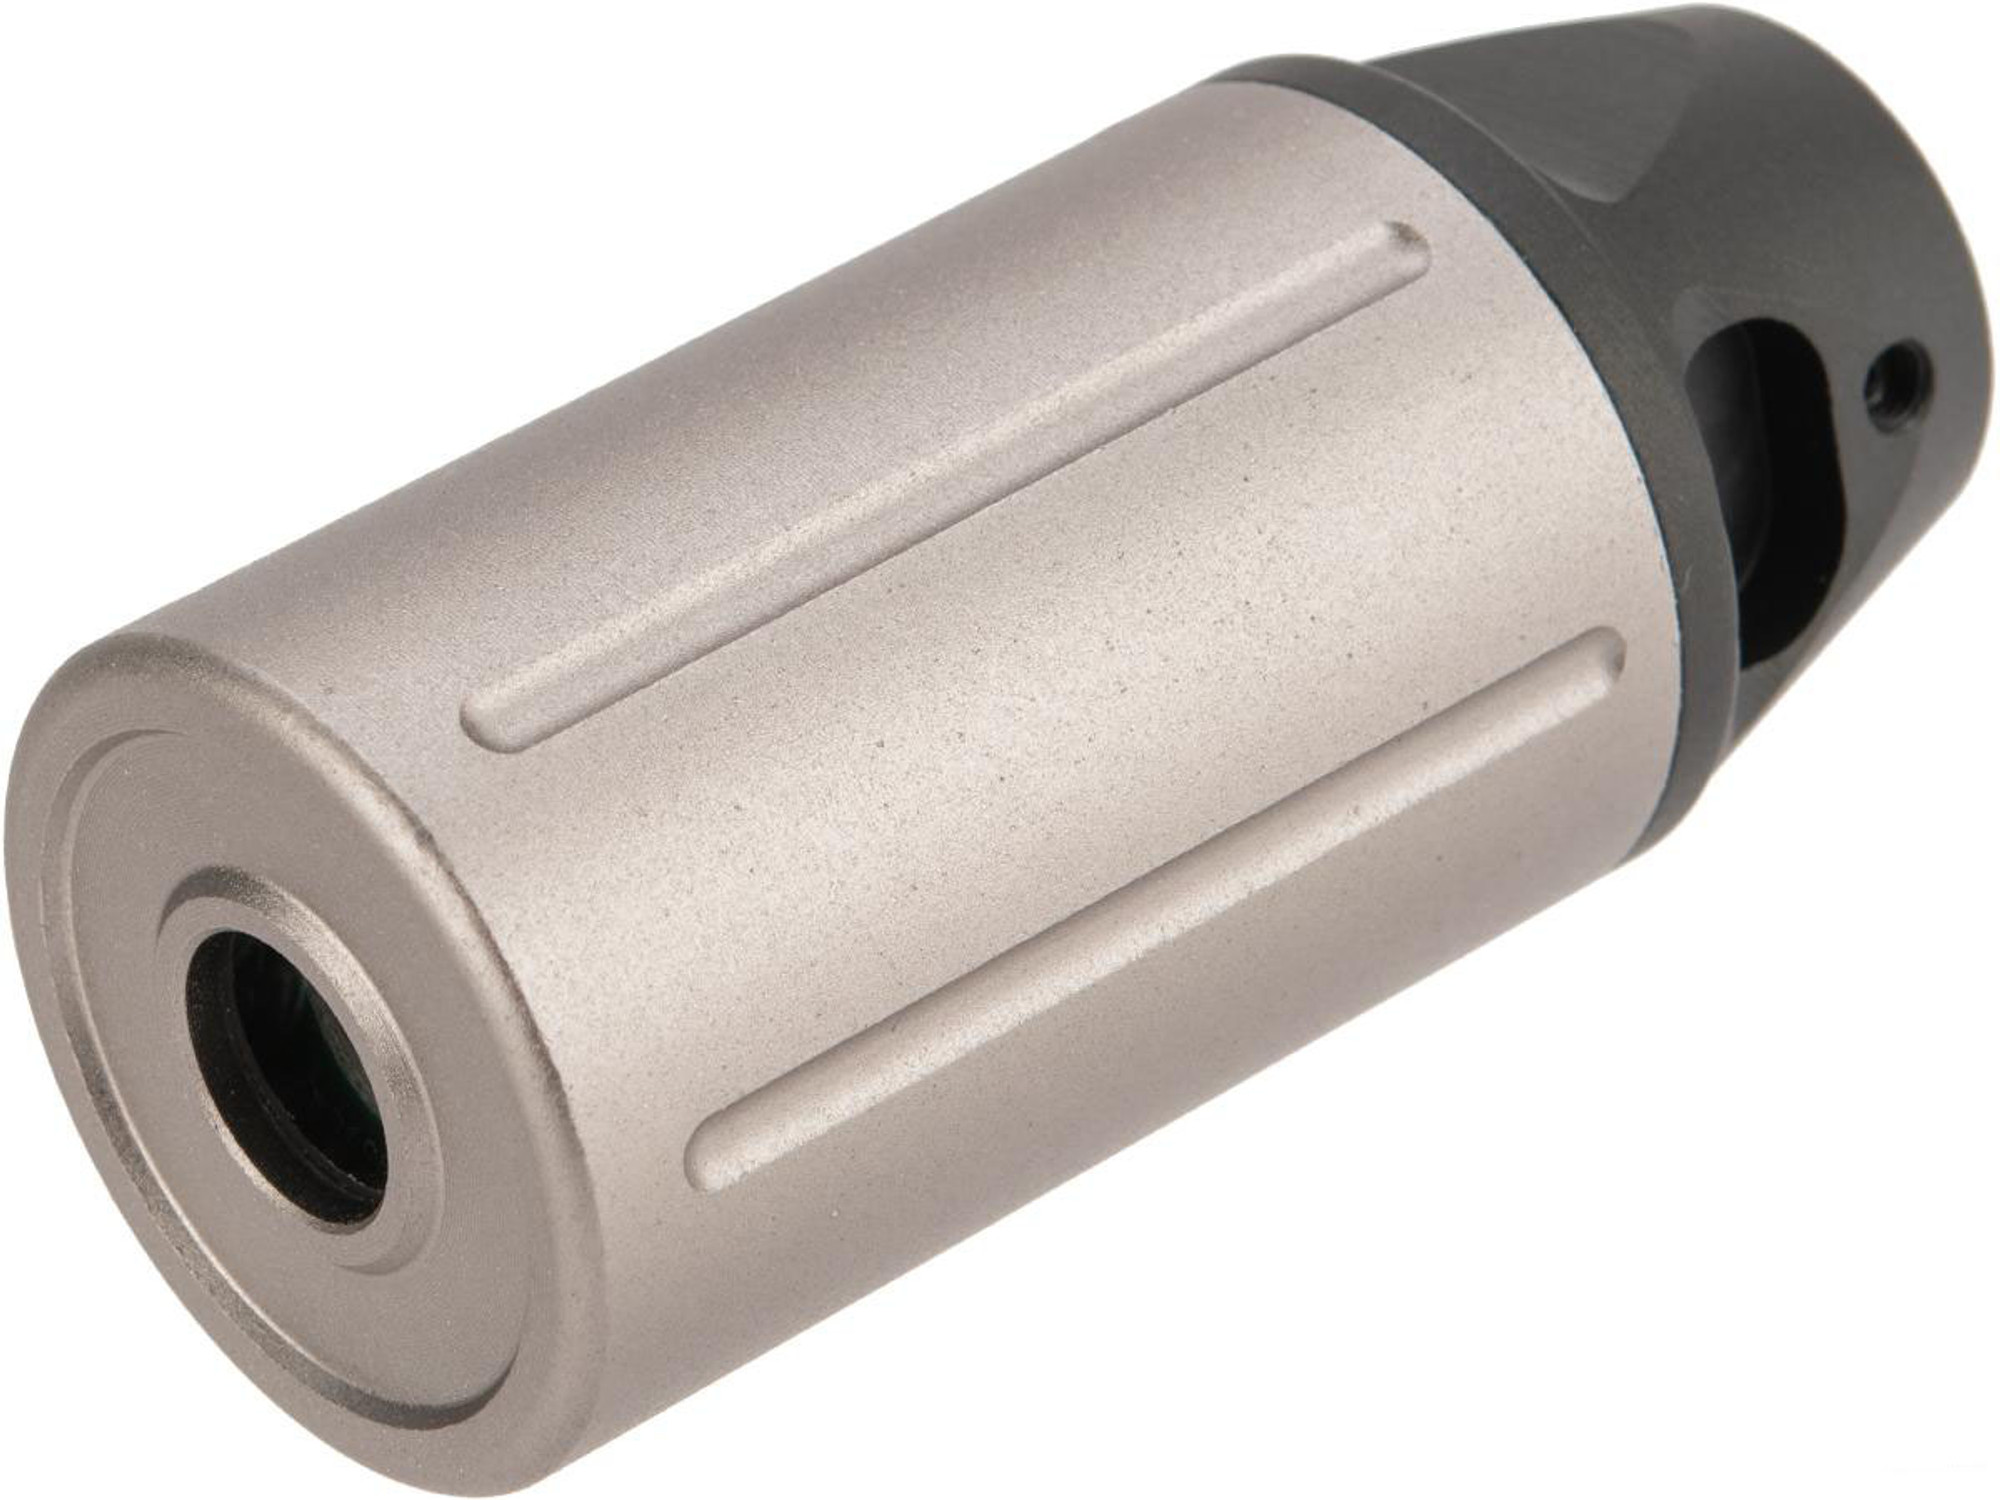 6mmProShop Flash Hider with Built-In Xcortech XT301 Mini Tracer Unit